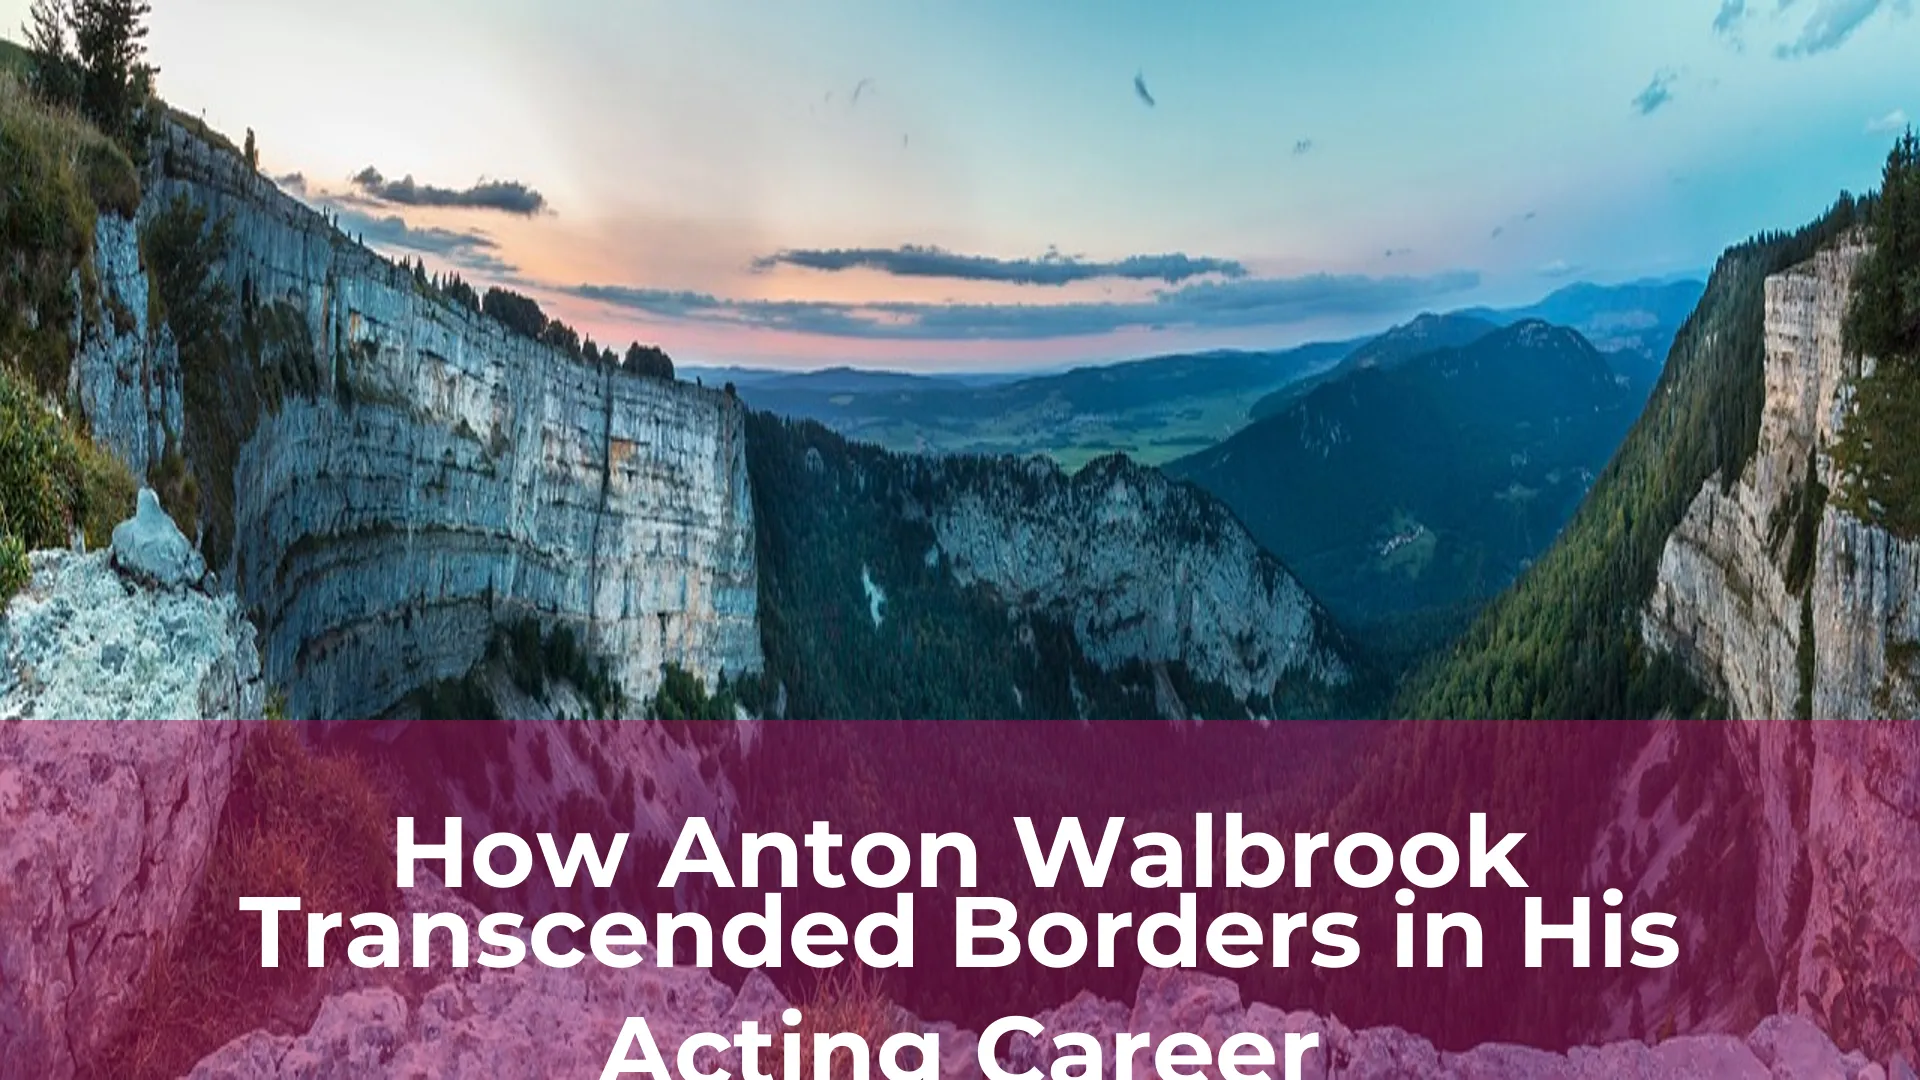 How anton walbrook transcended borders in his acting career